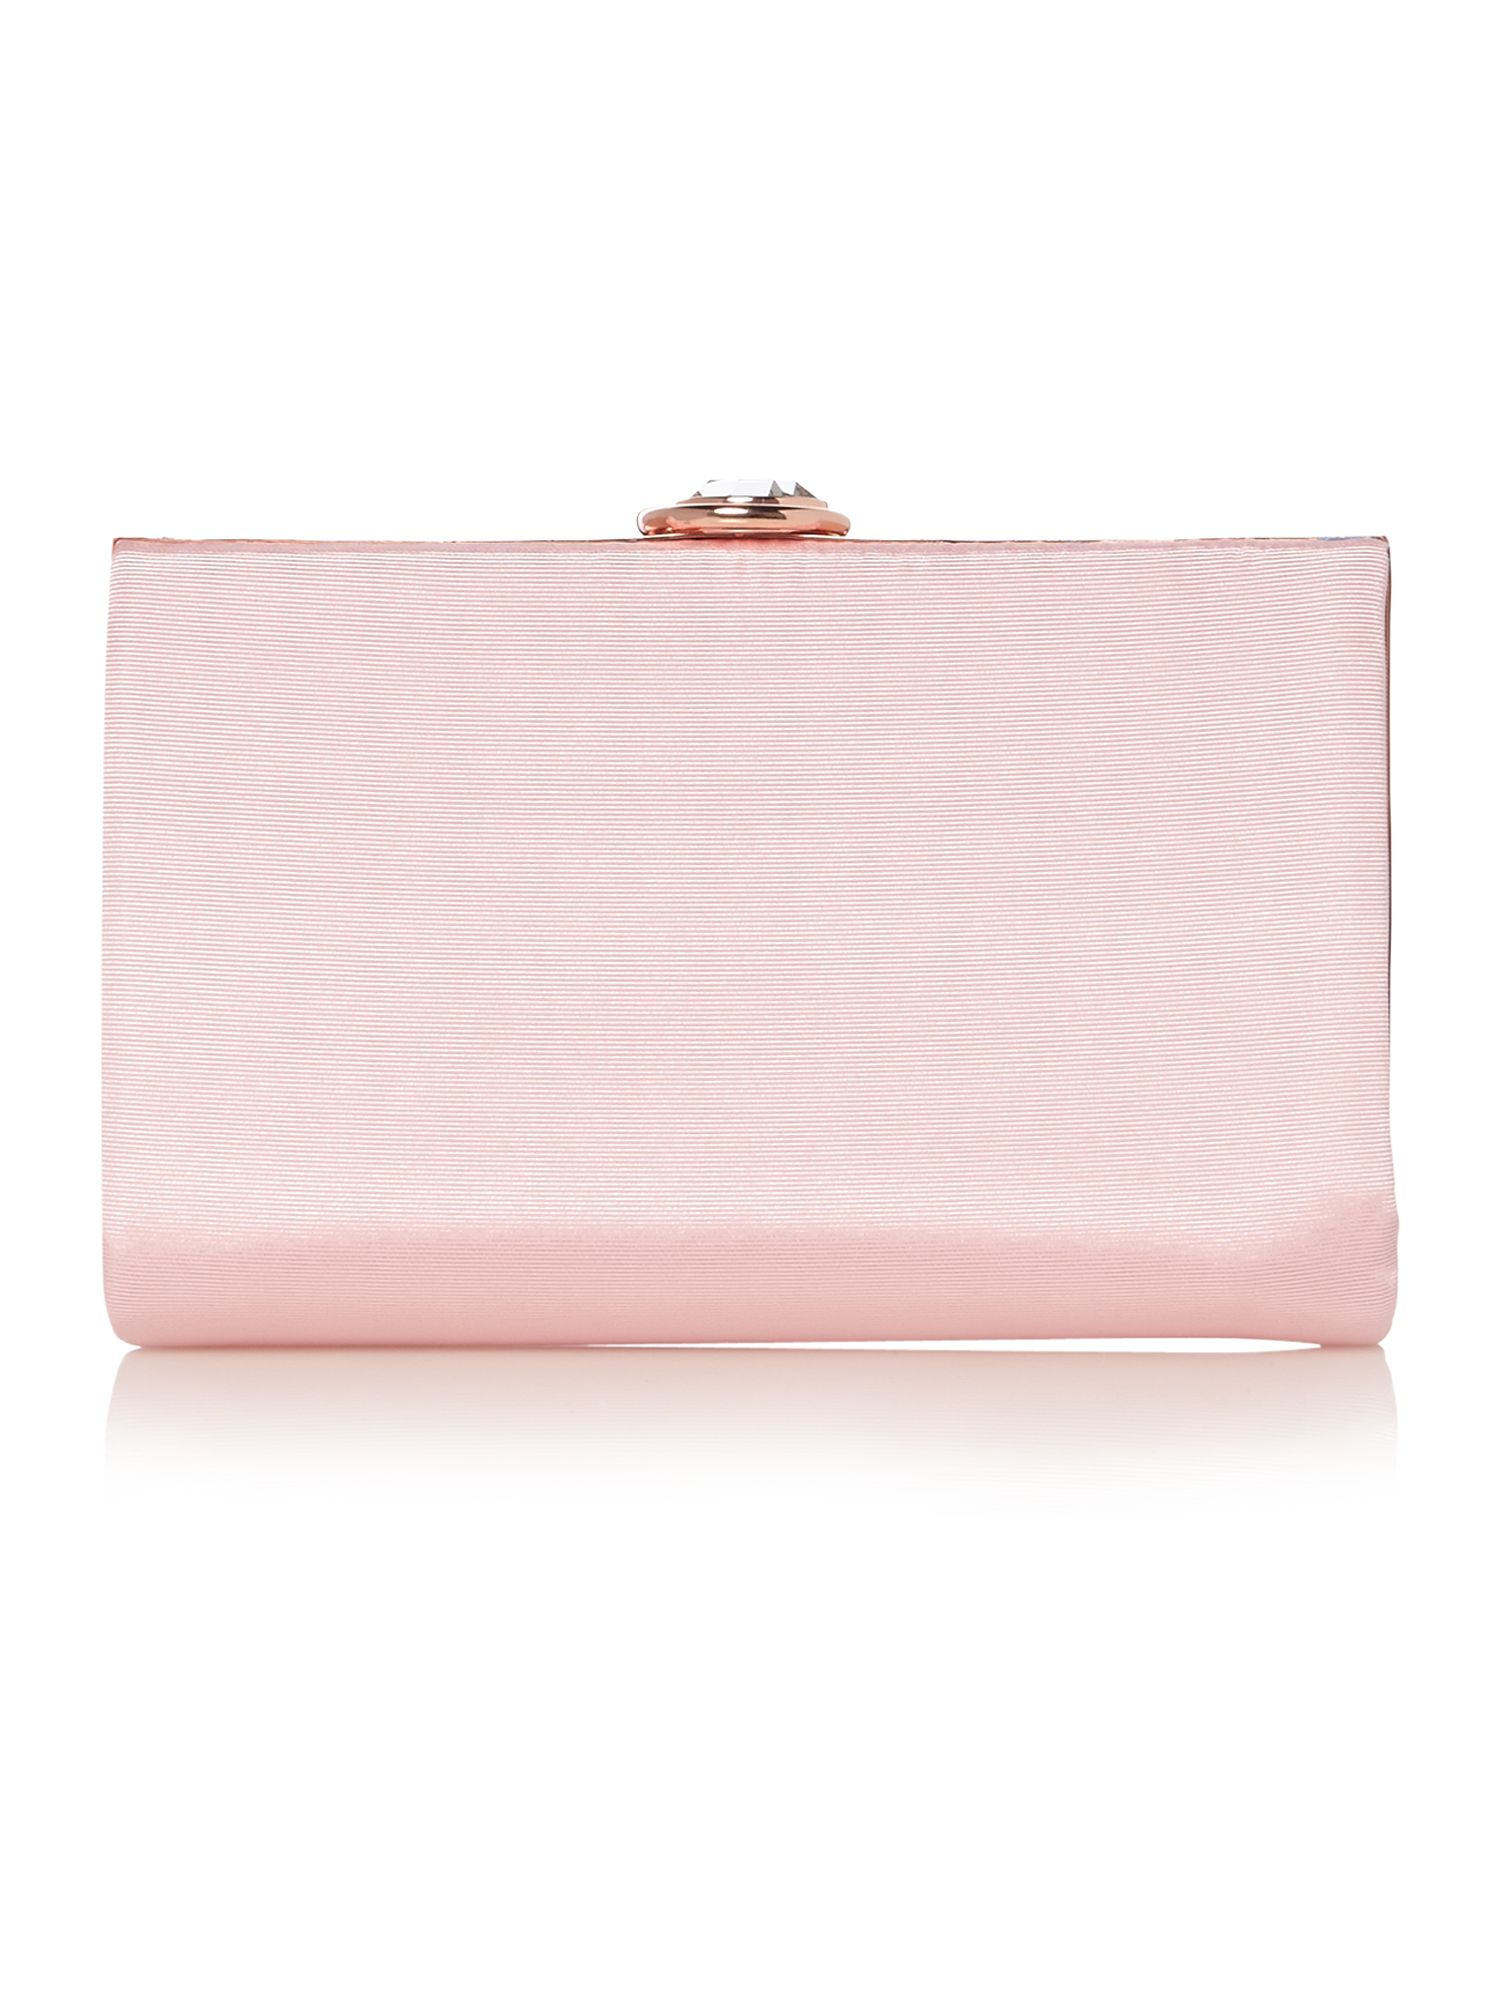 Ted baker Pale Pink Necklace Clutch Bag in Pink | Lyst